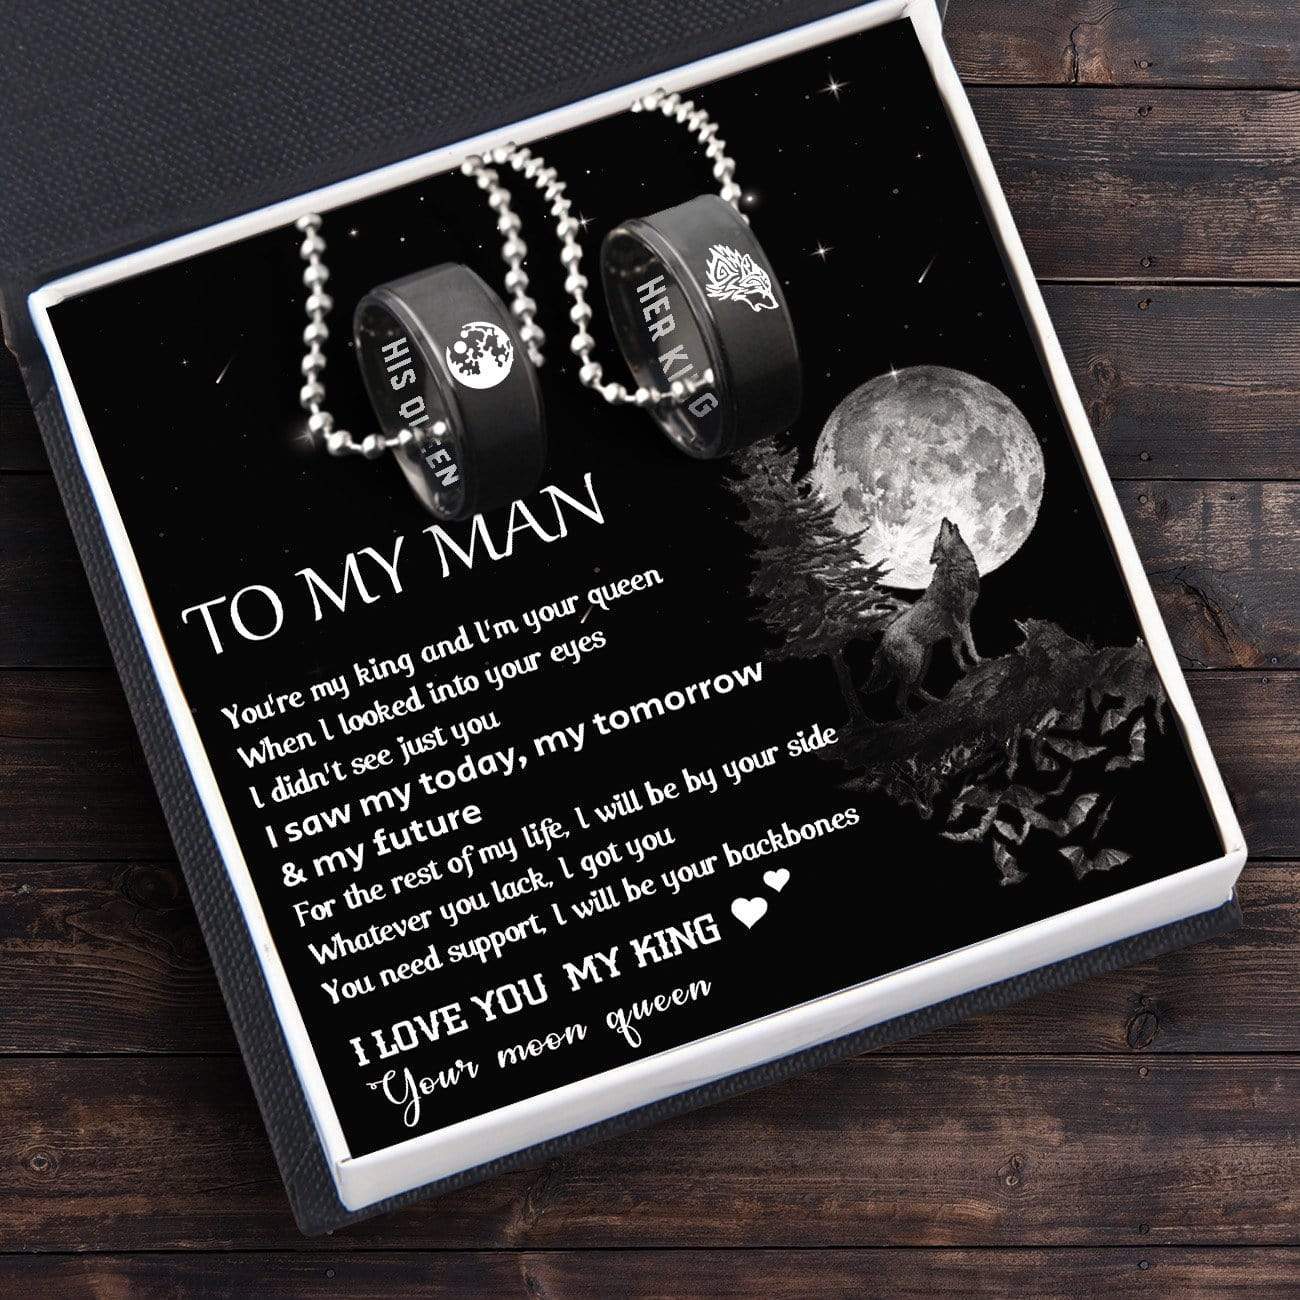 Couple Pendant Necklaces - To My Man - I Will Be By Your Side - Ukgnw26002 - Love My Soulmate